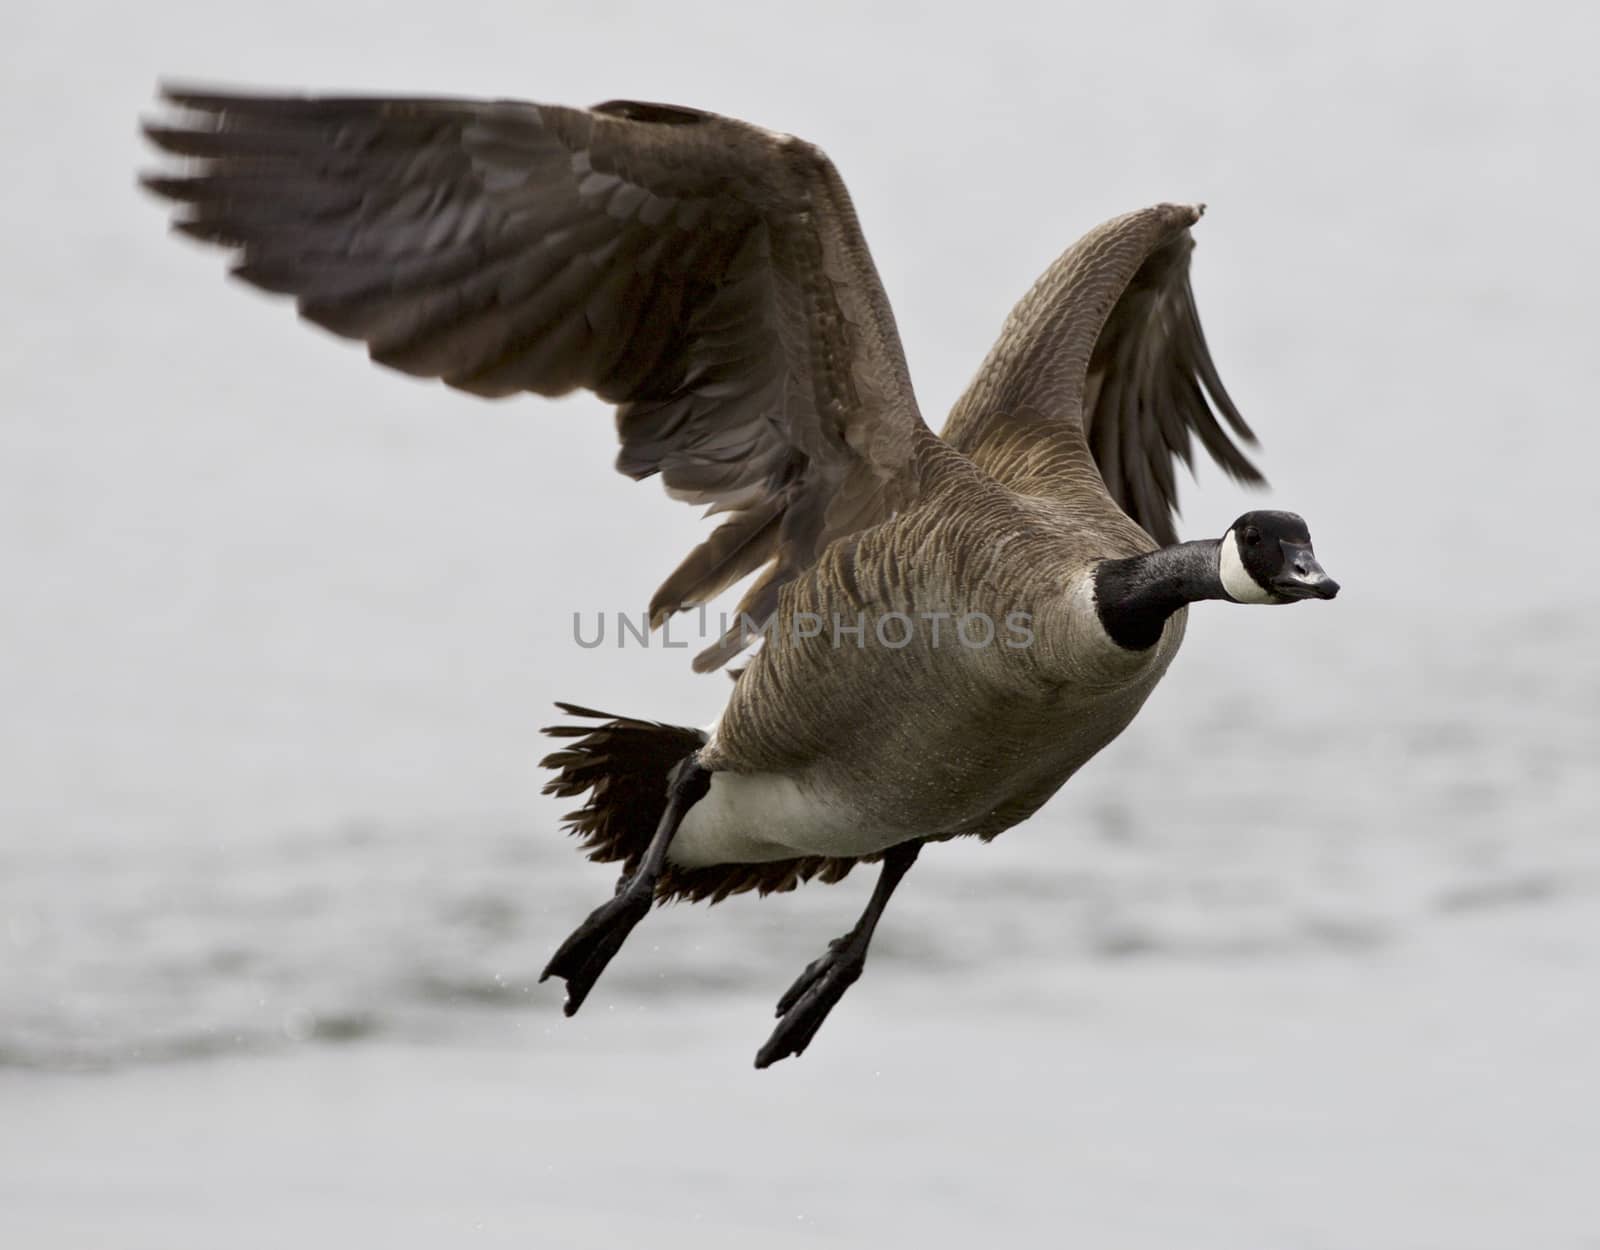 Beautiful isolated image with a flying Canada goose